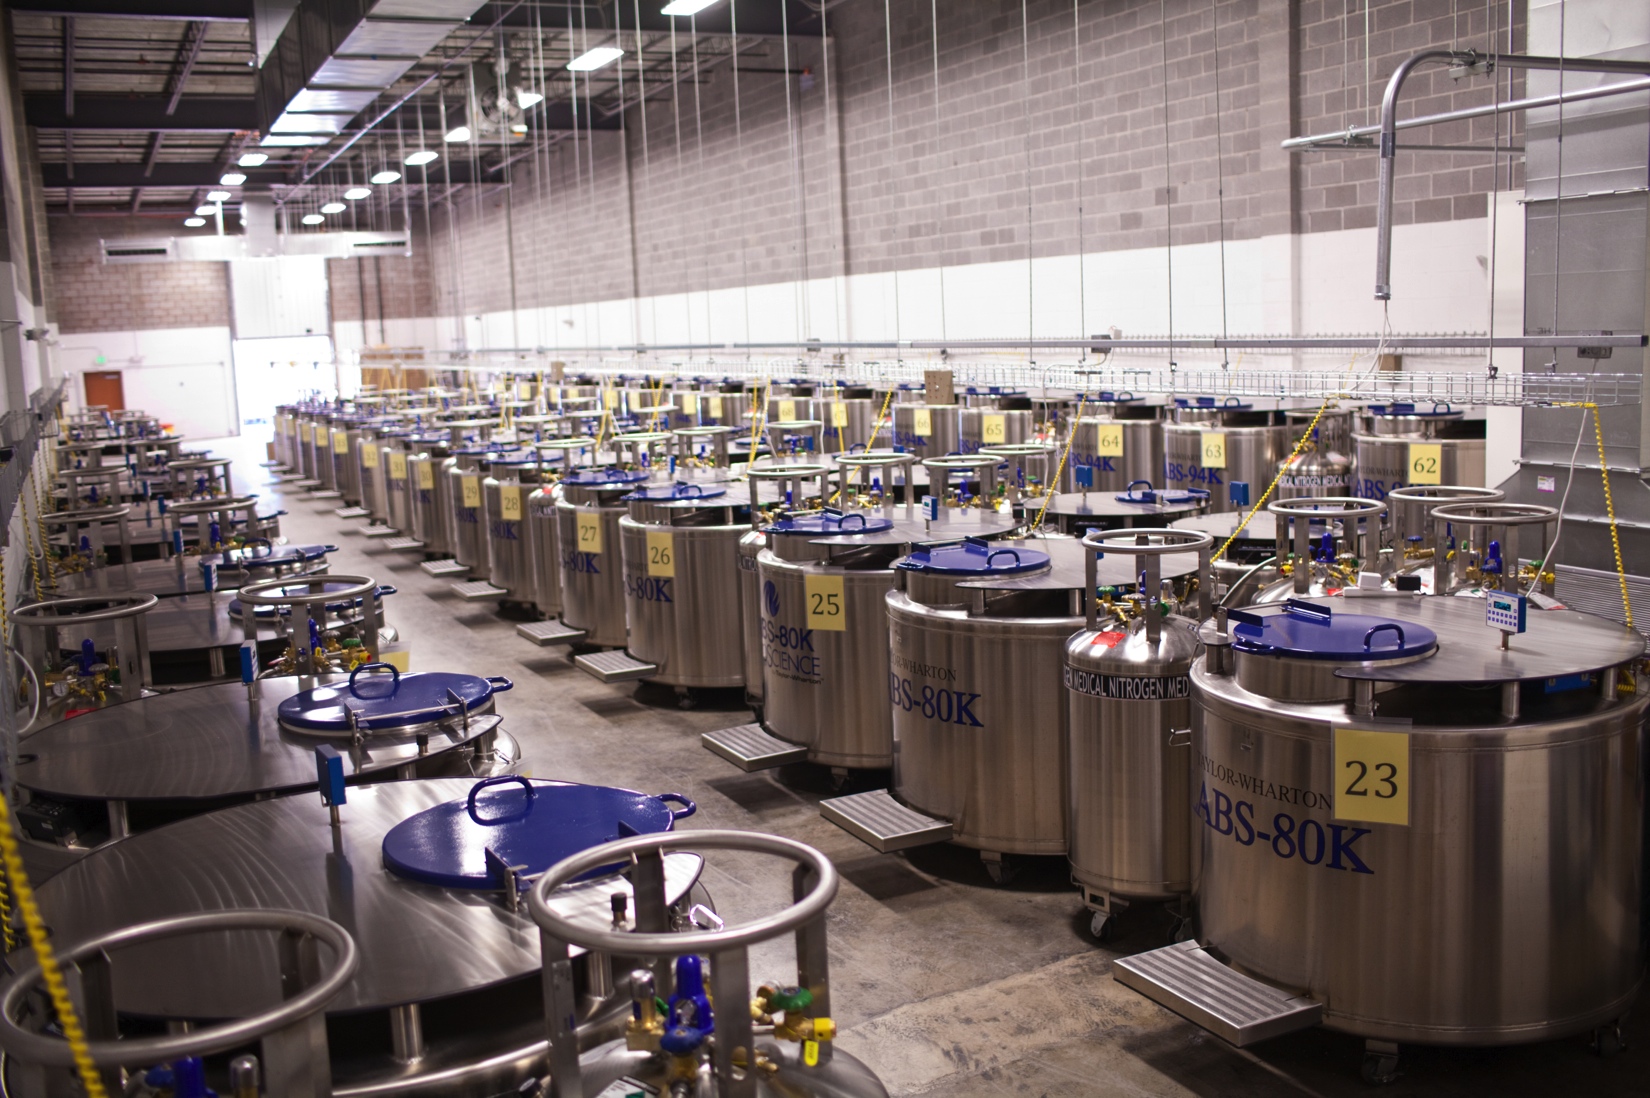 Rows of Freezers located in Johns Hopkins Biological Repository